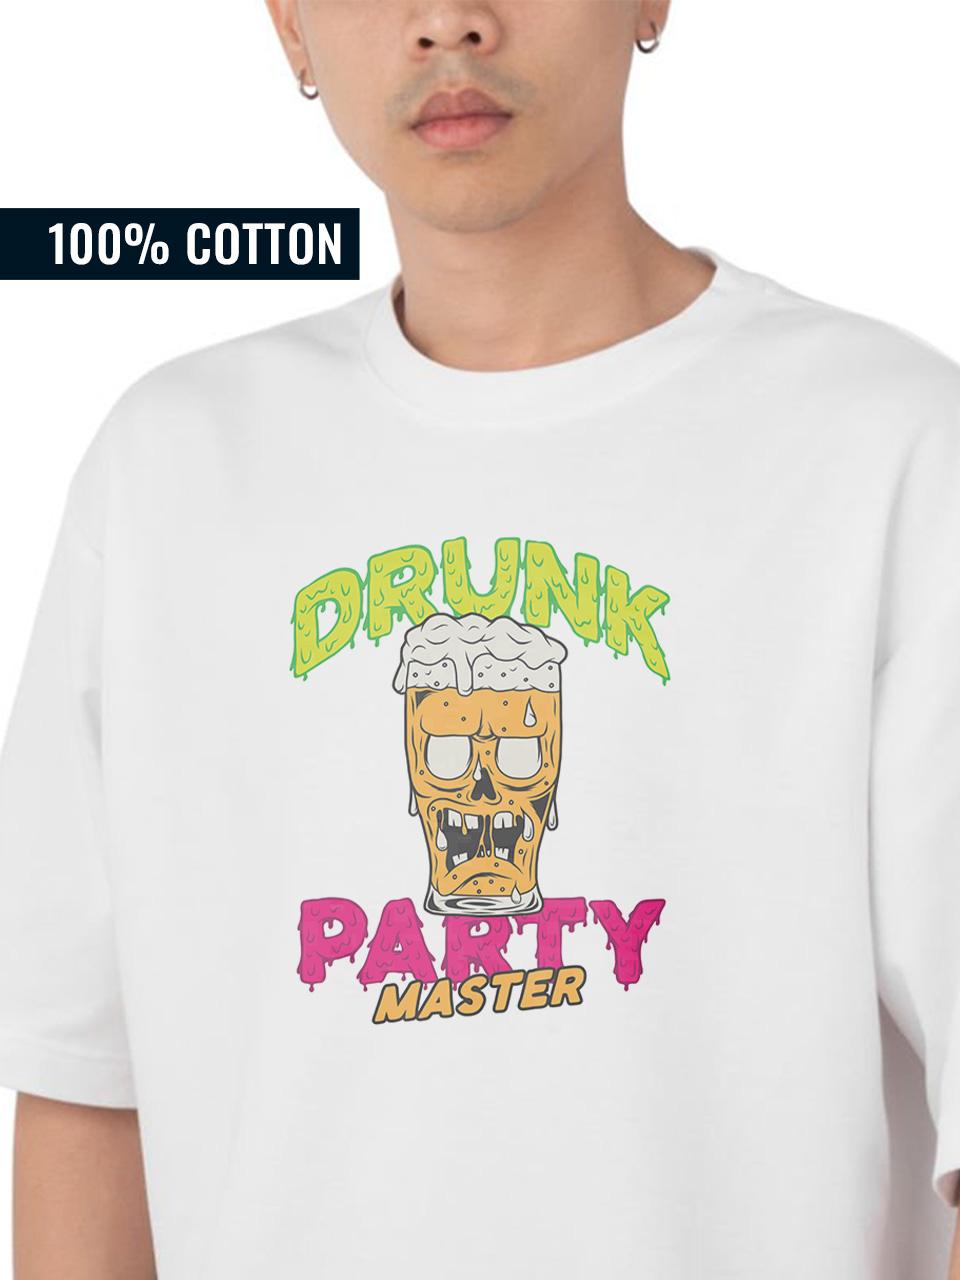 PartyMaster Cocktails Oversized T-Shirt